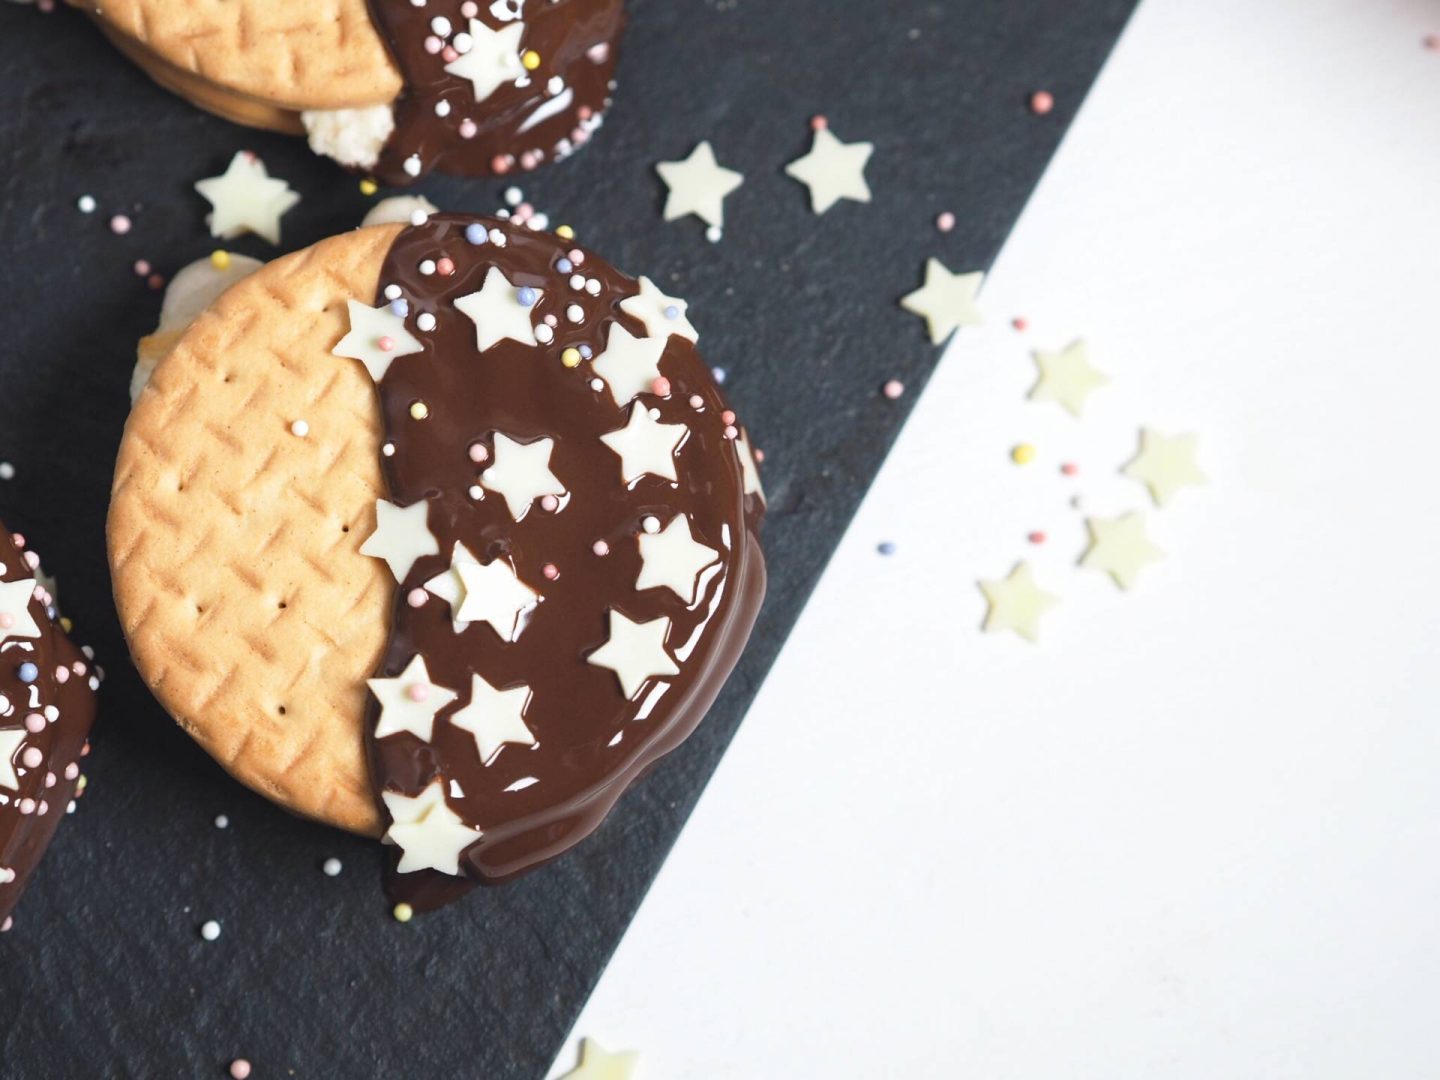 EPIC FIREWORKS NIGHT S’MORES RECIPE